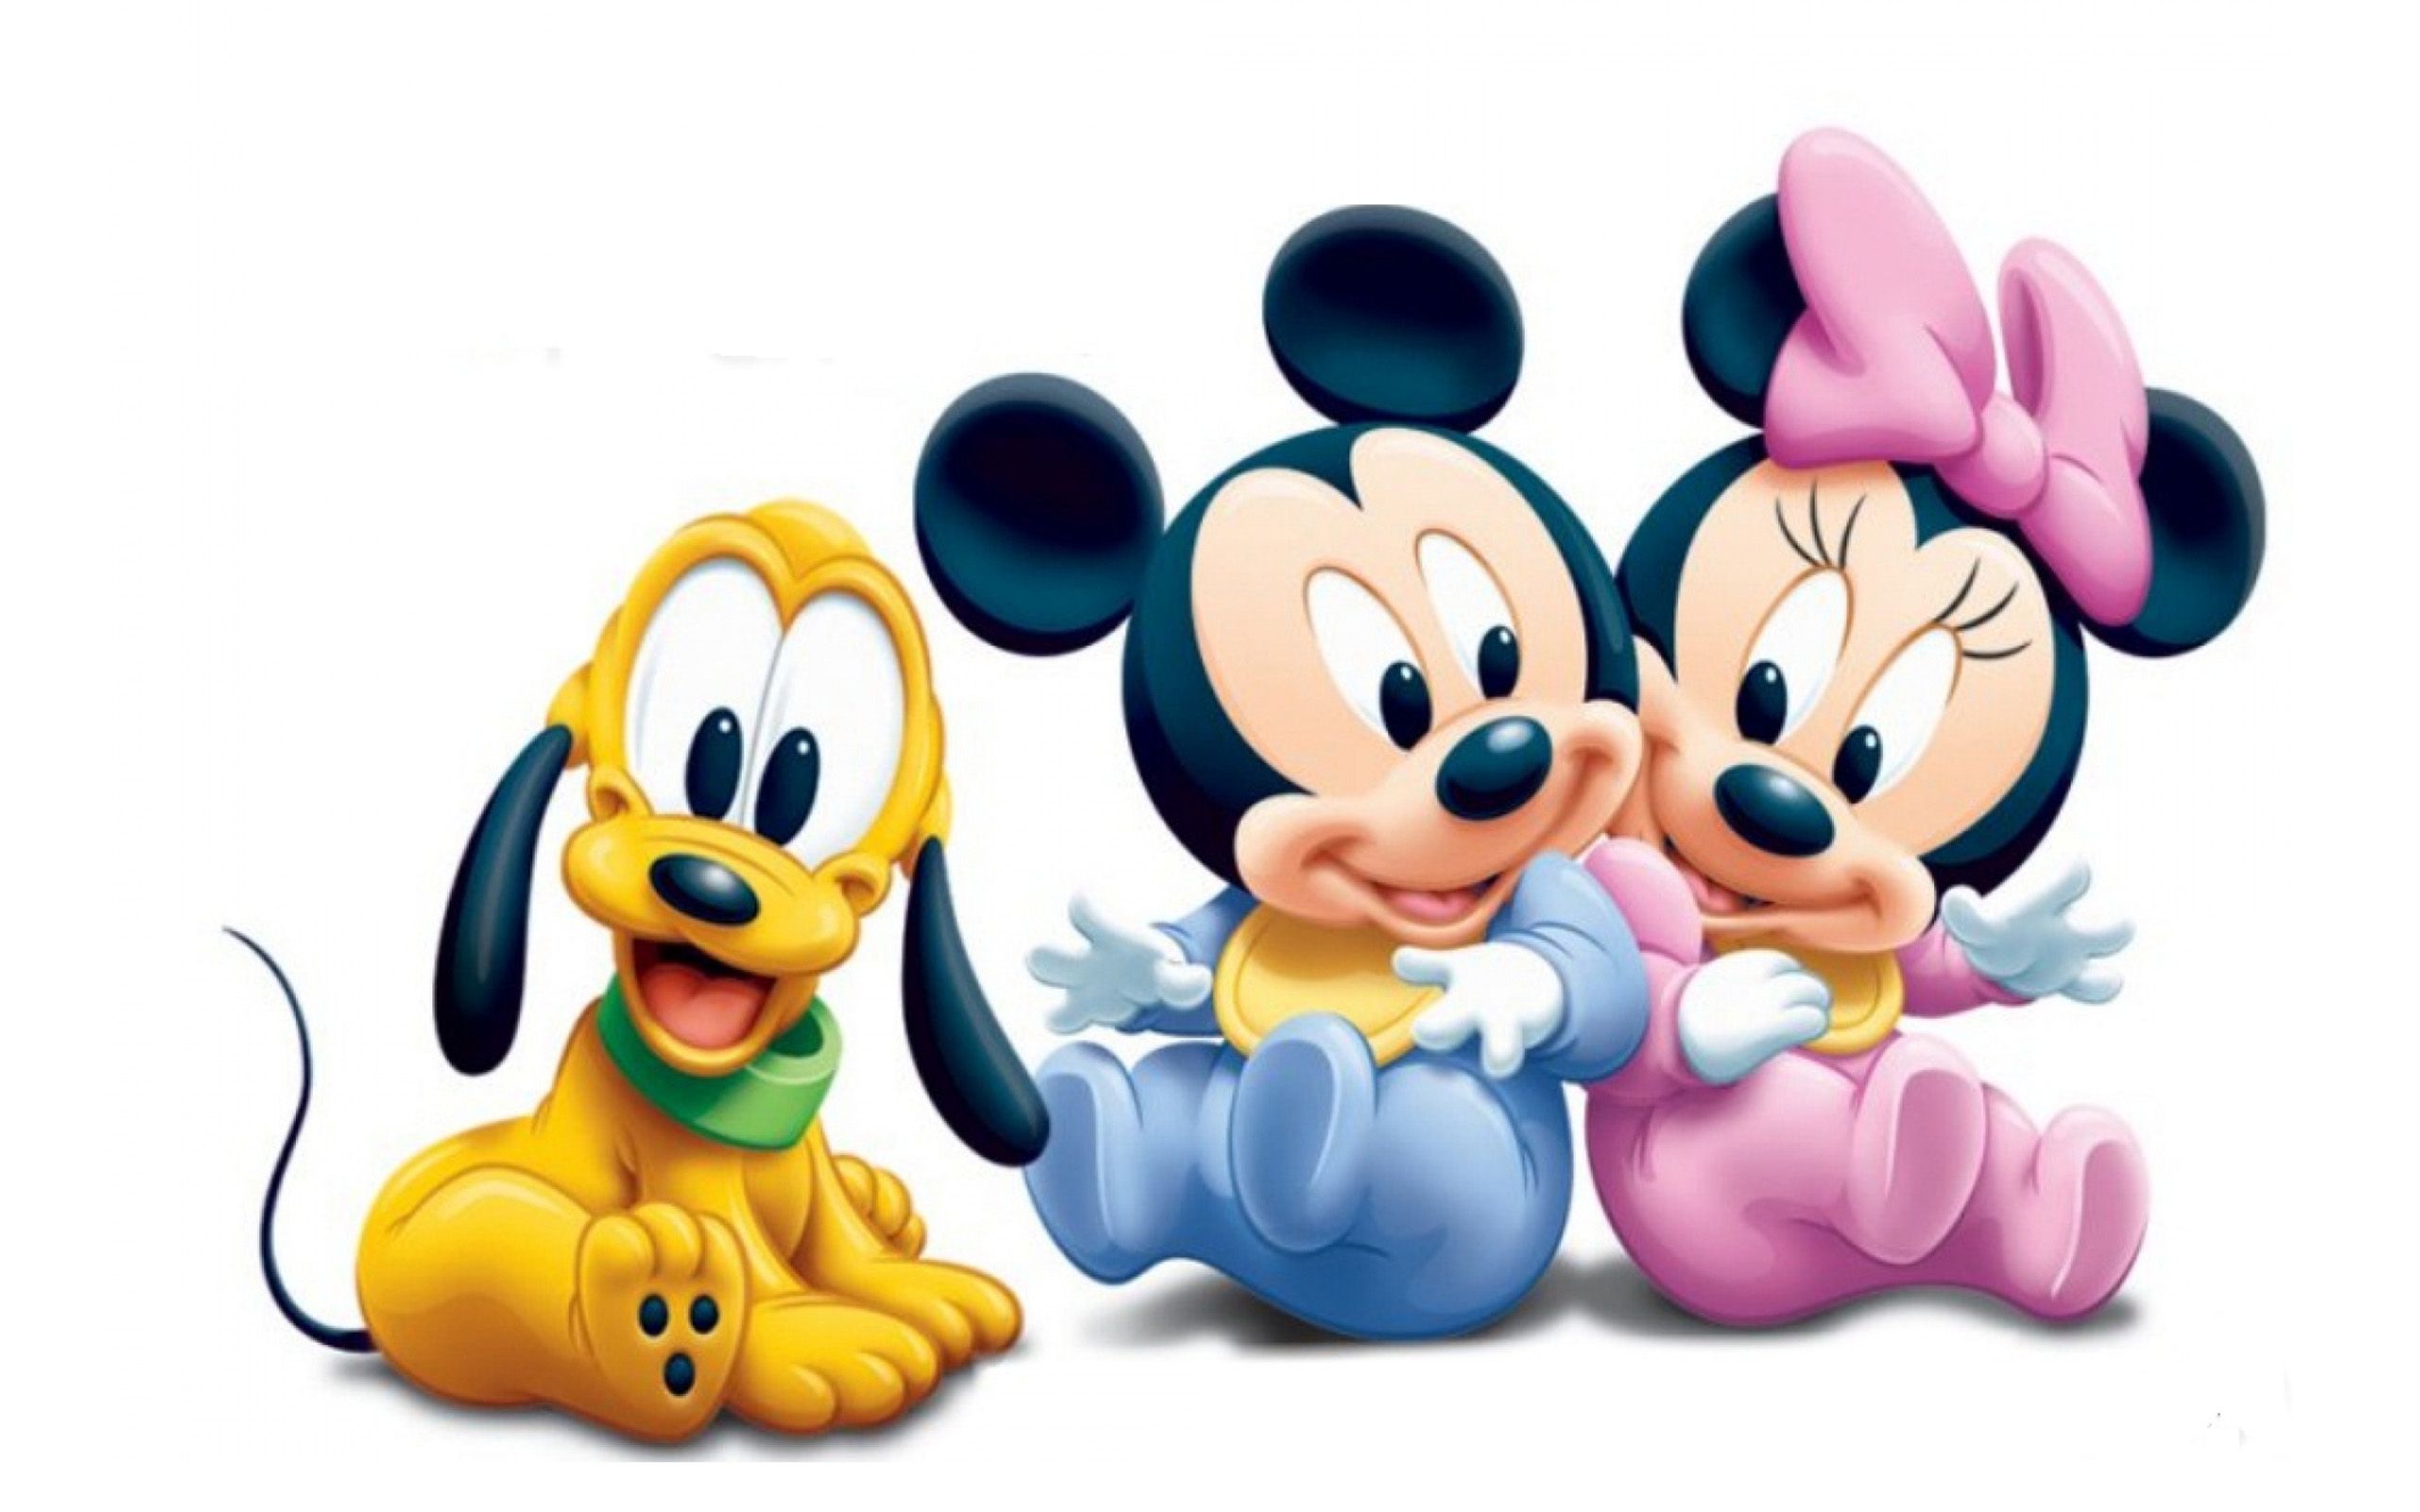 Mickey Mouse Pluto And Minnie Mouse As Babies Disney HD Wallpaper, Wallpaper13.com